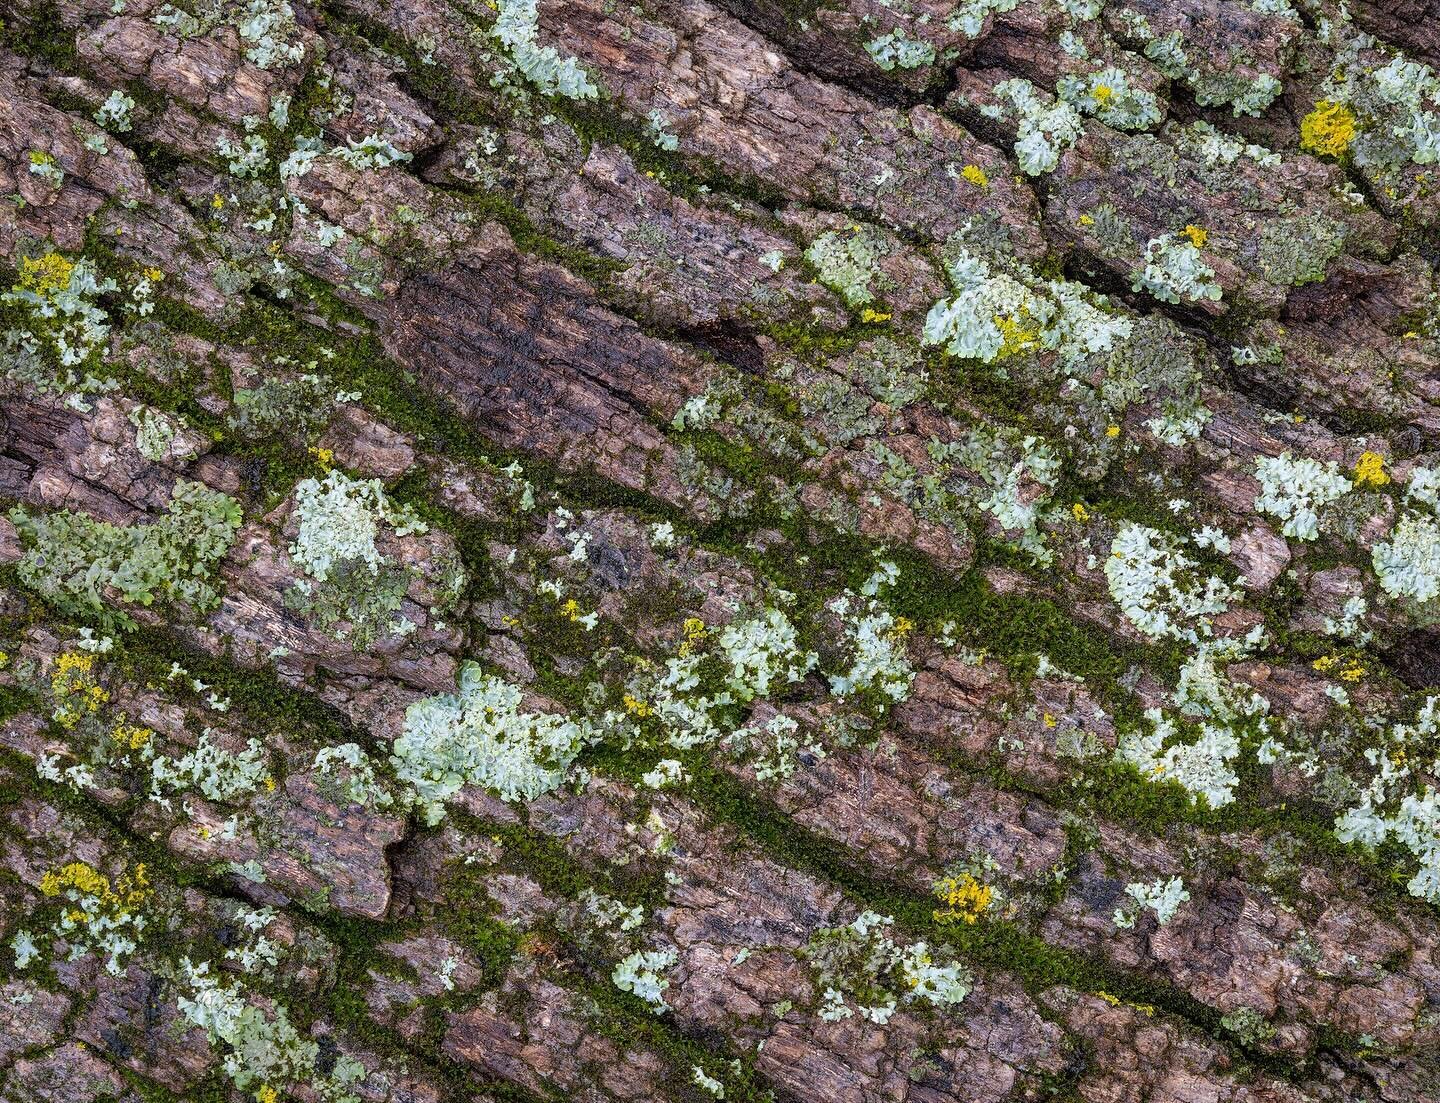 I&rsquo;m grateful for lichen, bark, and moss&mdash;a topic I just wrote 1,100 words about in a new blog post (specifically: integrating gratitude into nature photography, with some reflections on why I&rsquo;m so grateful for photography in general 